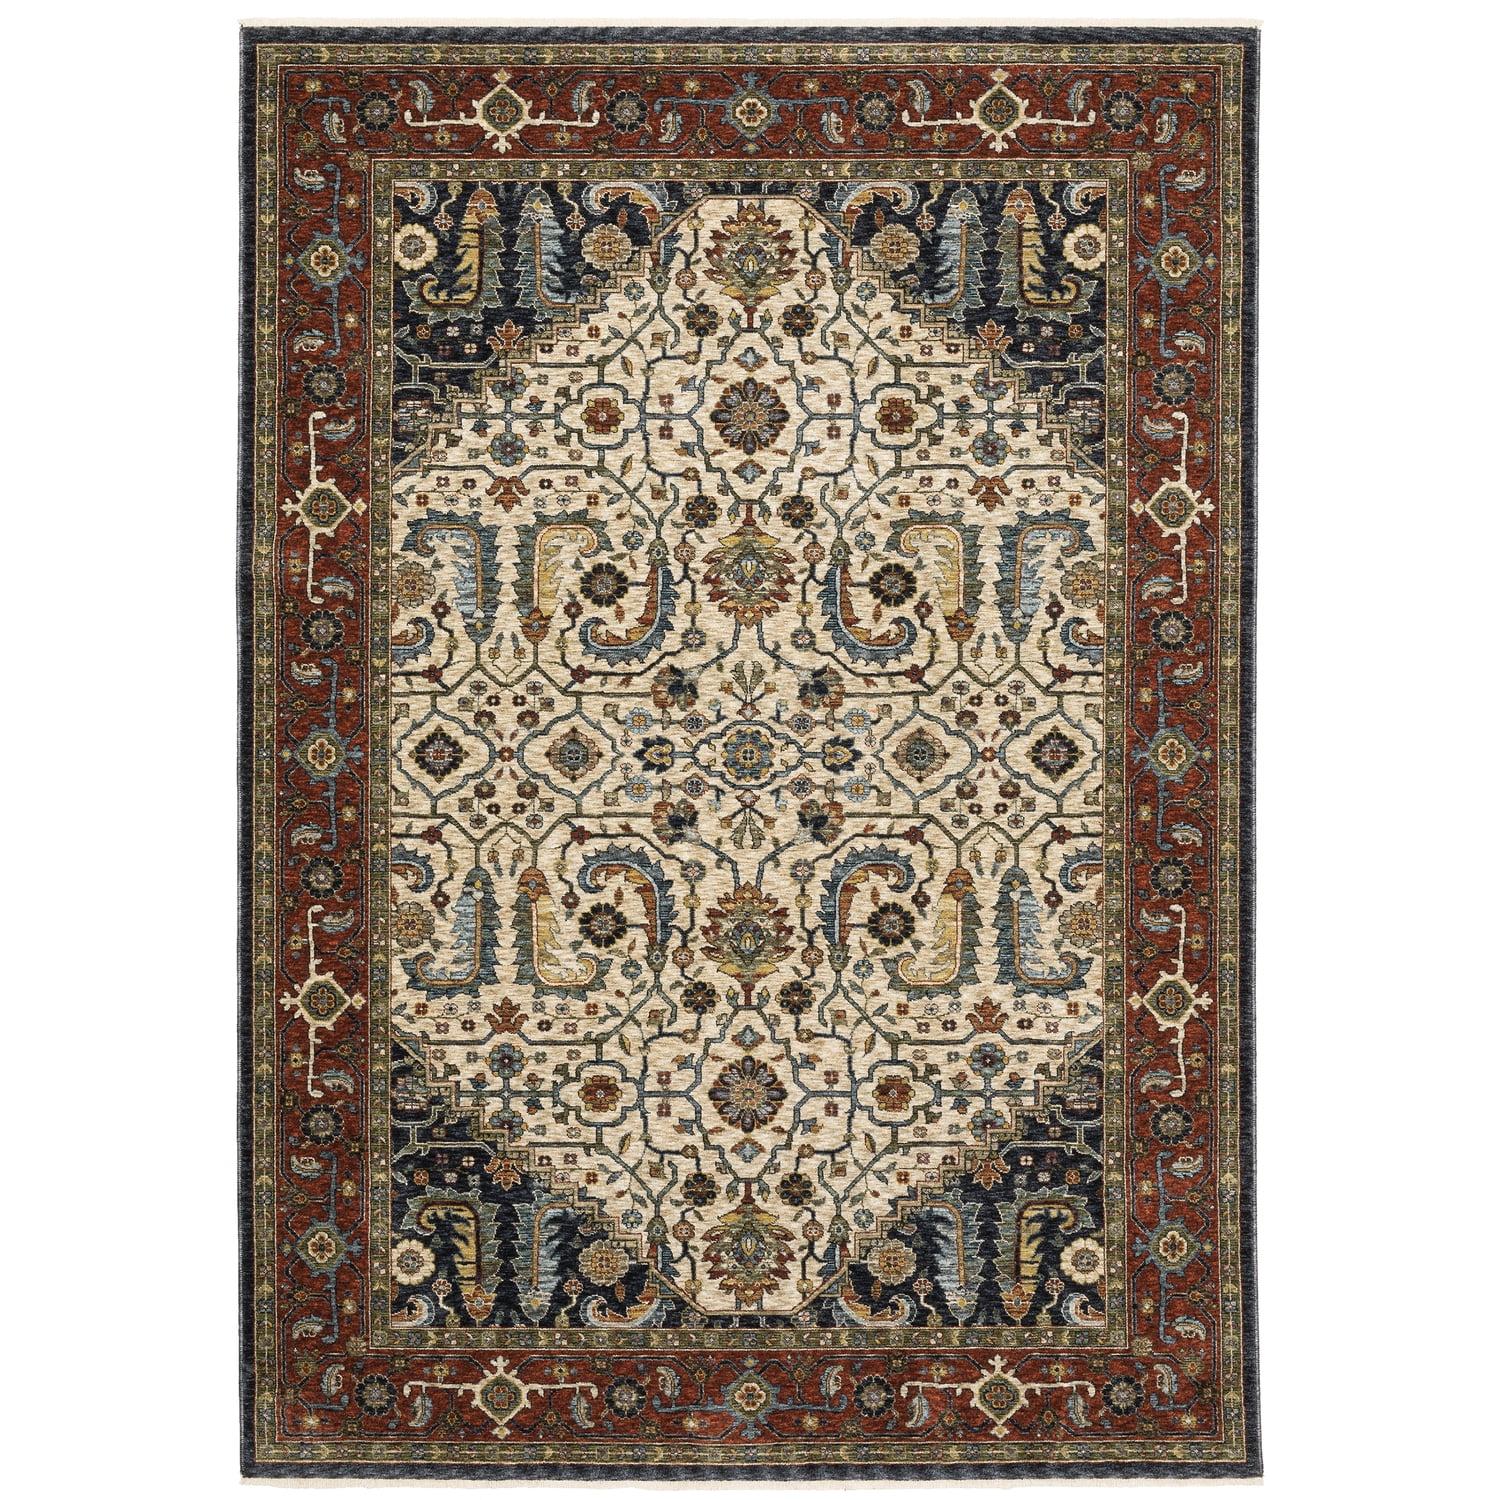 Aberdeen Ivory Traditional Low-Profile Wool Blend Rug 3'3" x 5'